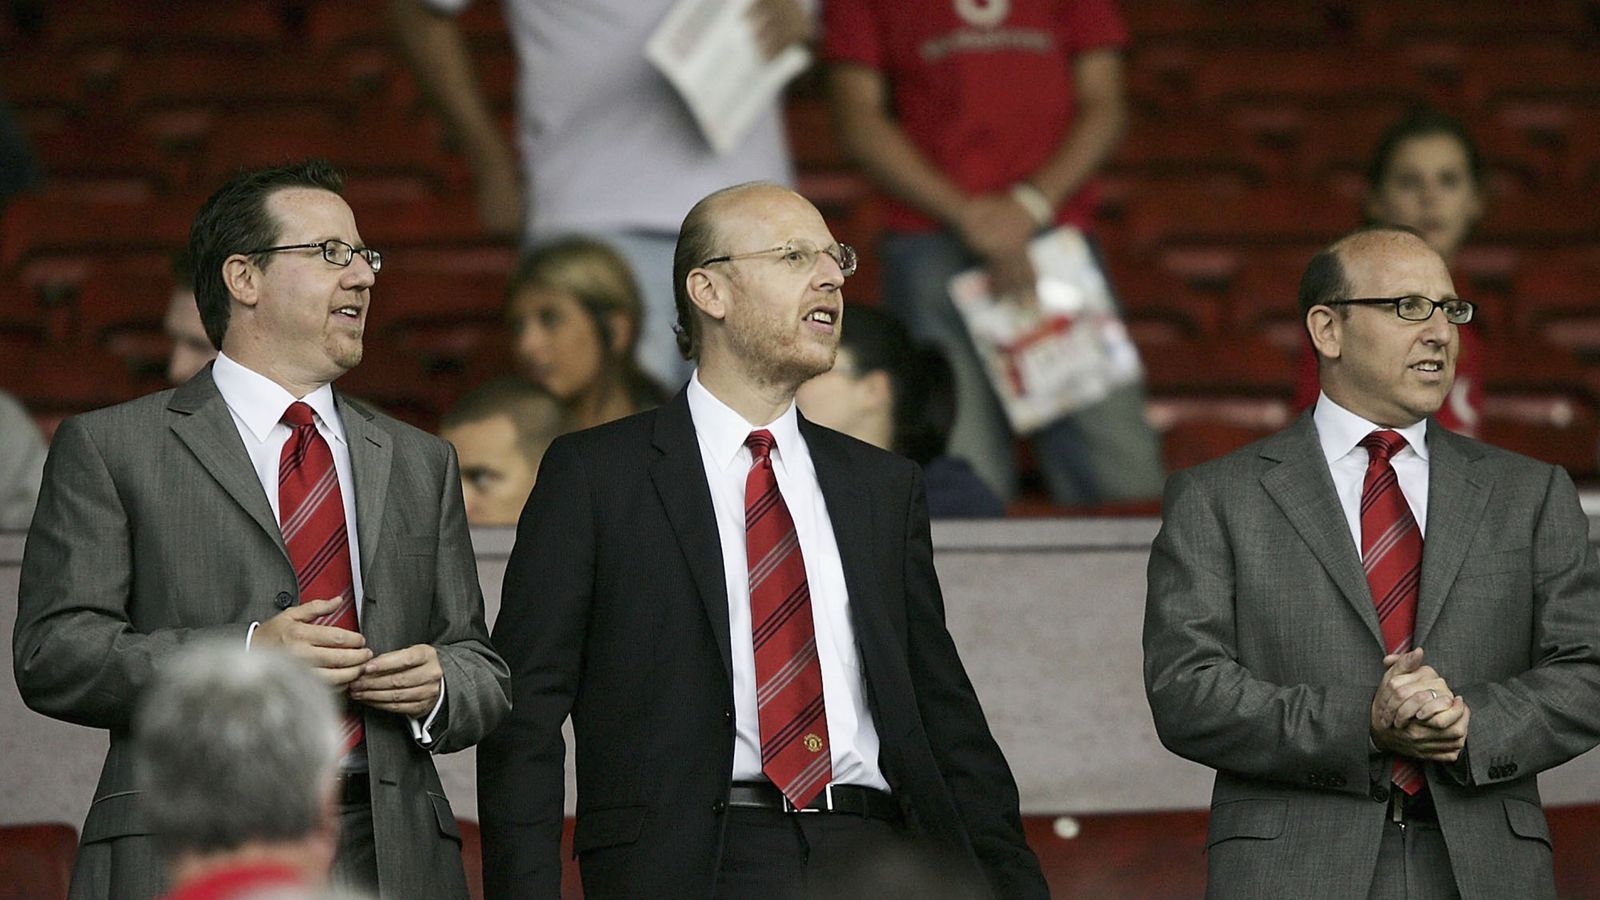 The Glazer family- owners of Manchester United Football Club.